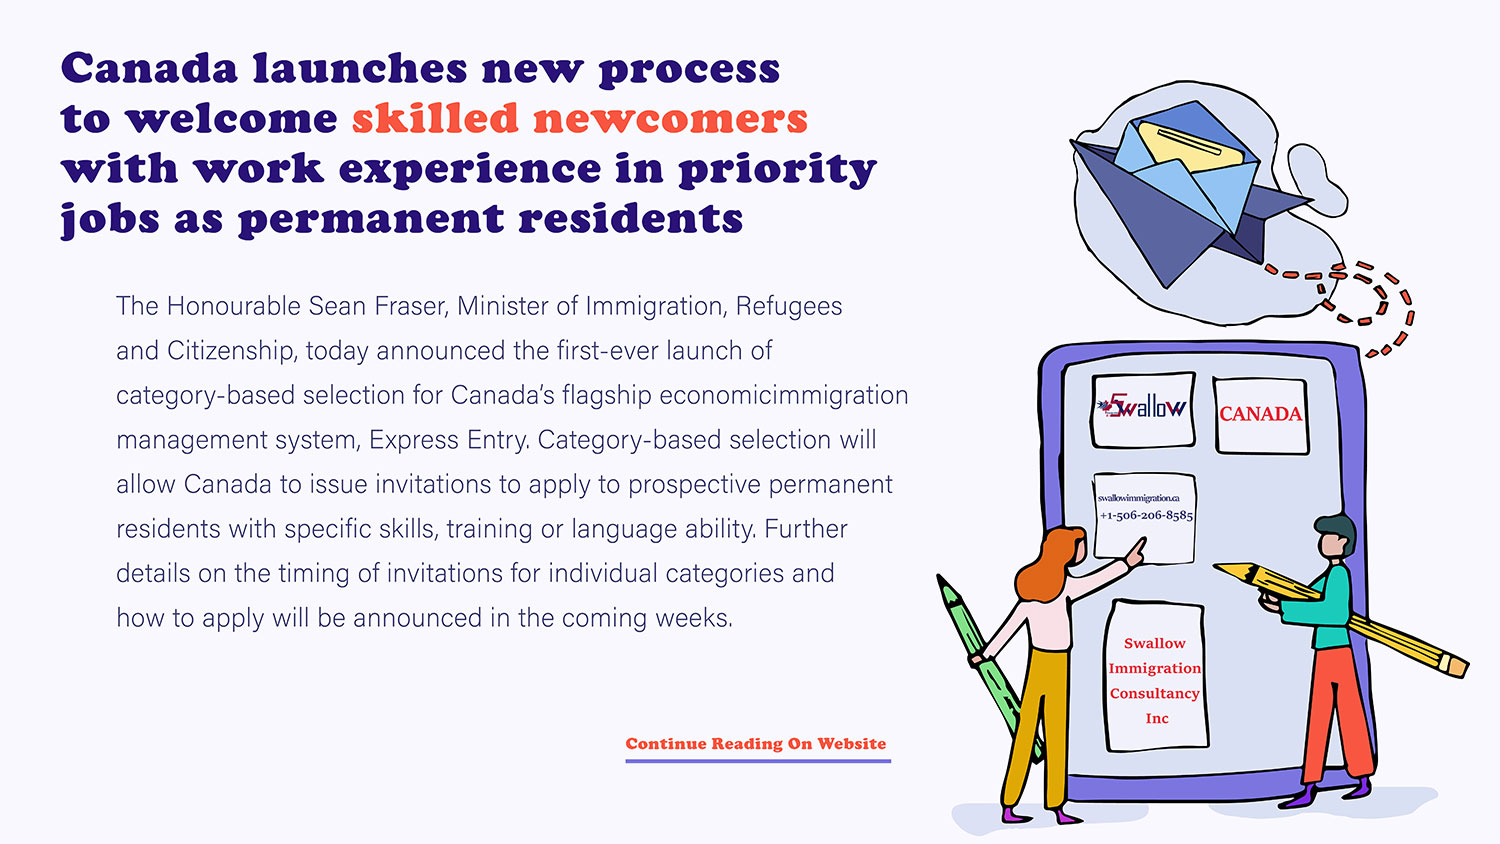 Canada launches new process to welcome skilled newcomers with work experience in priority jobs as permanent residents